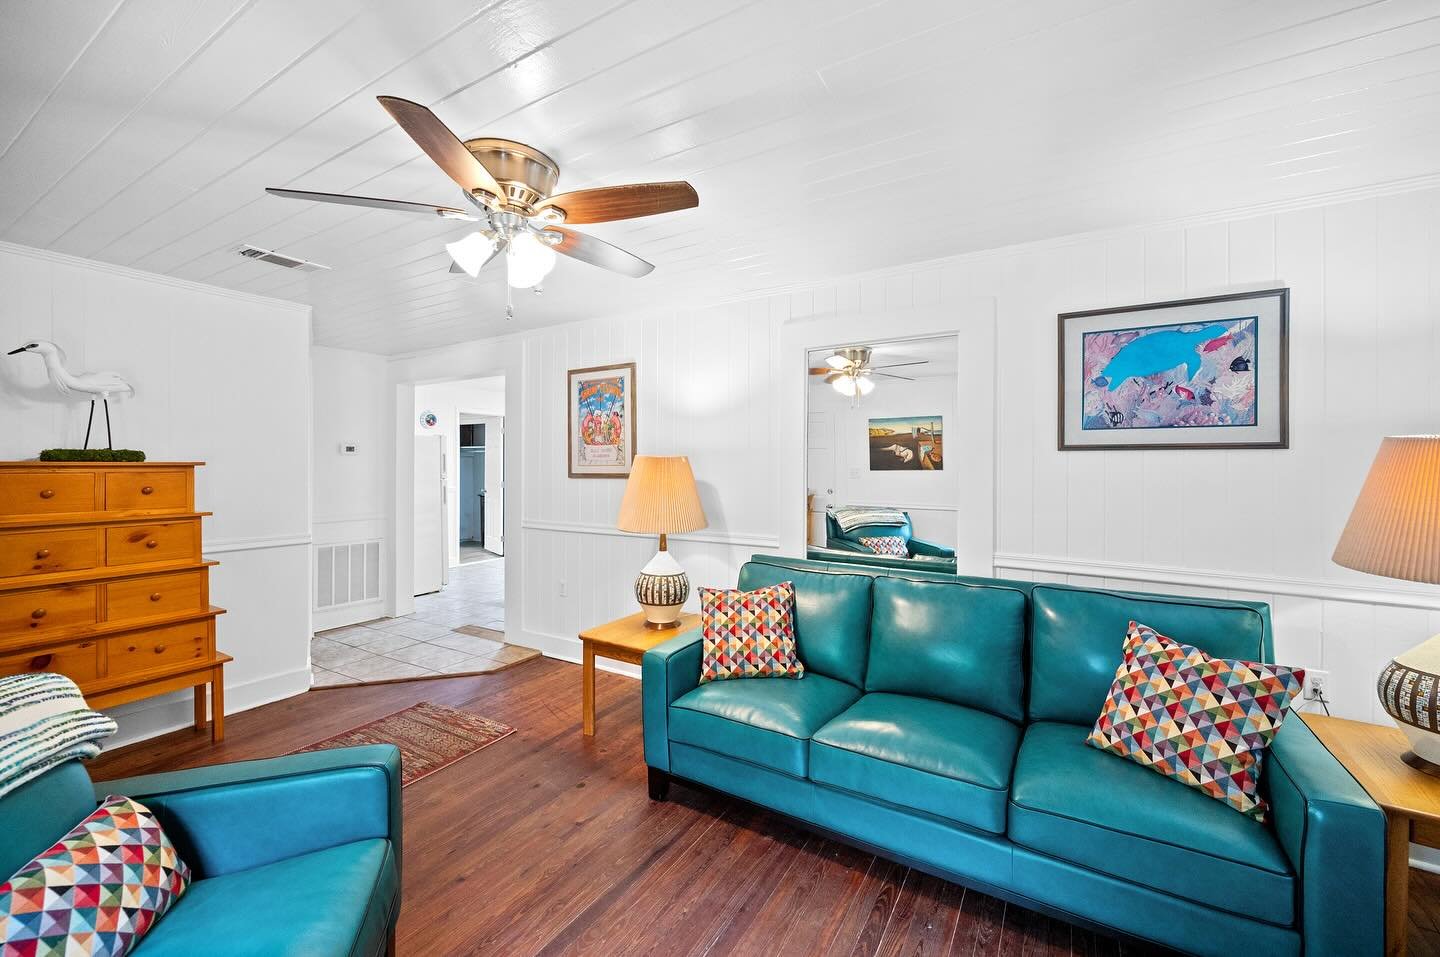 If you are looking for last minute accommodations for @hangoutfest look no further! Big Beach Bungalow is perfectly situated for all of the fun&mdash;she is just a few doors down from @bigbeachbrewing &amp; is an easy bike ride to the festival. This 